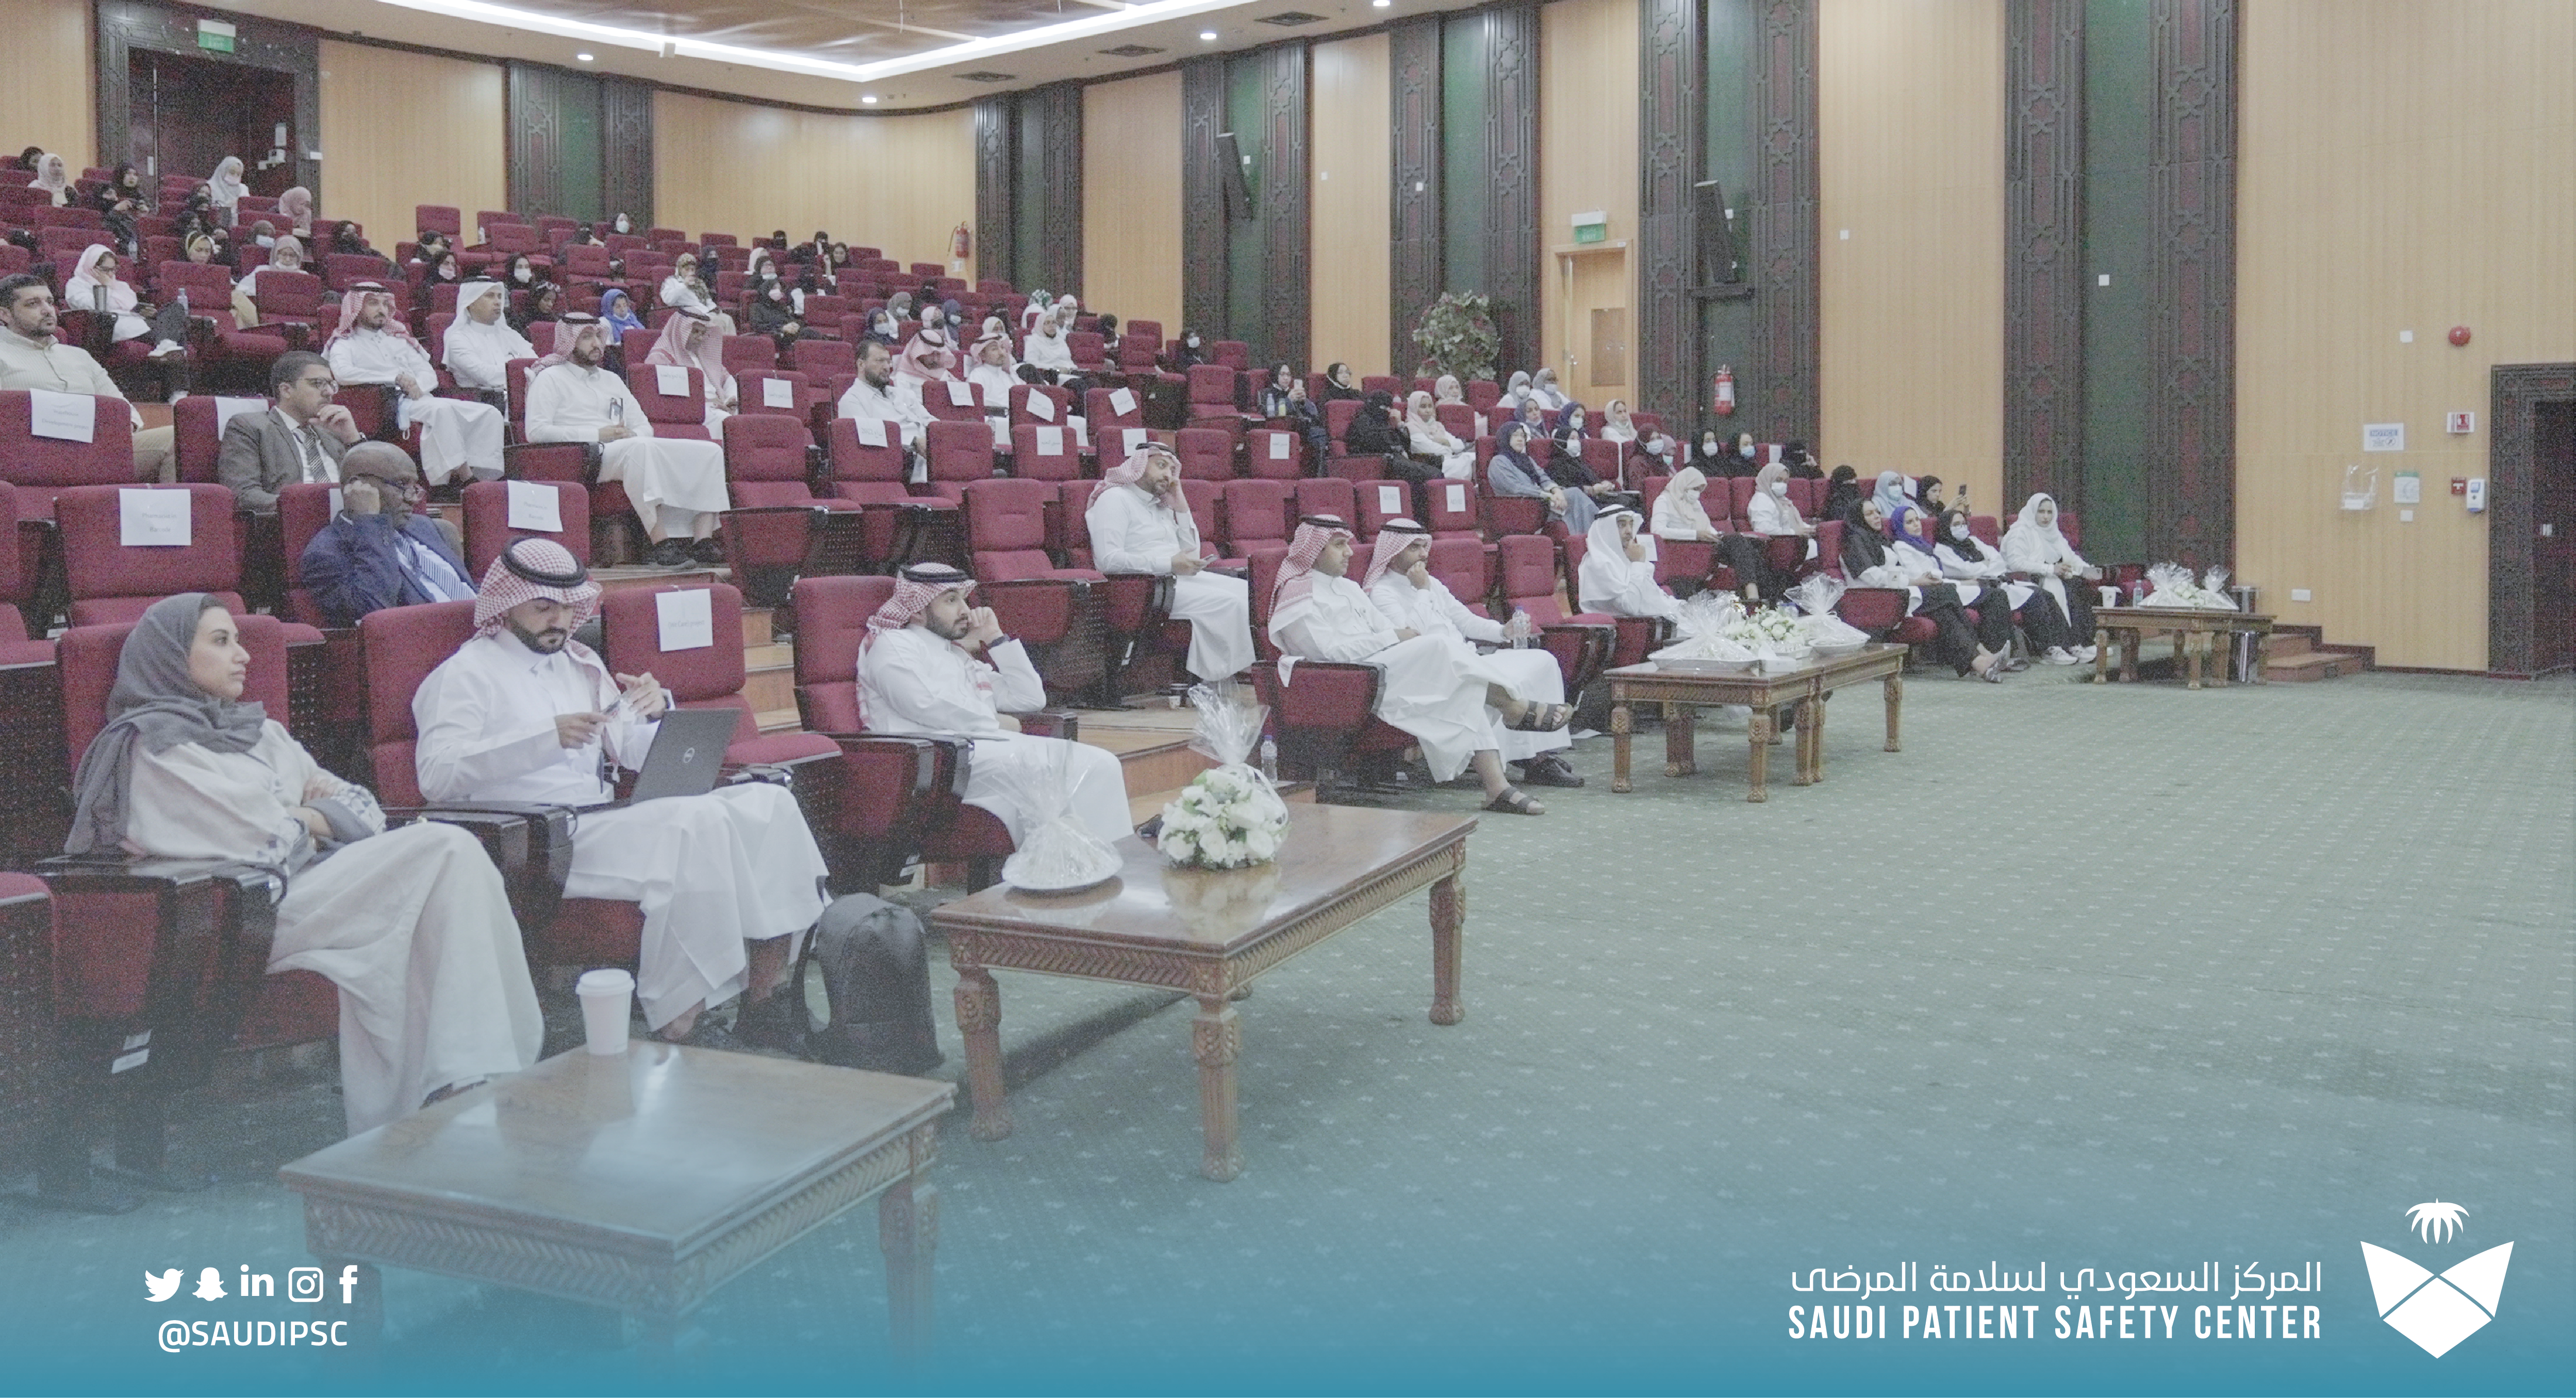 The Saudi Patient Safety Center held its fourth symposium on patient safety culture in the Makkah region